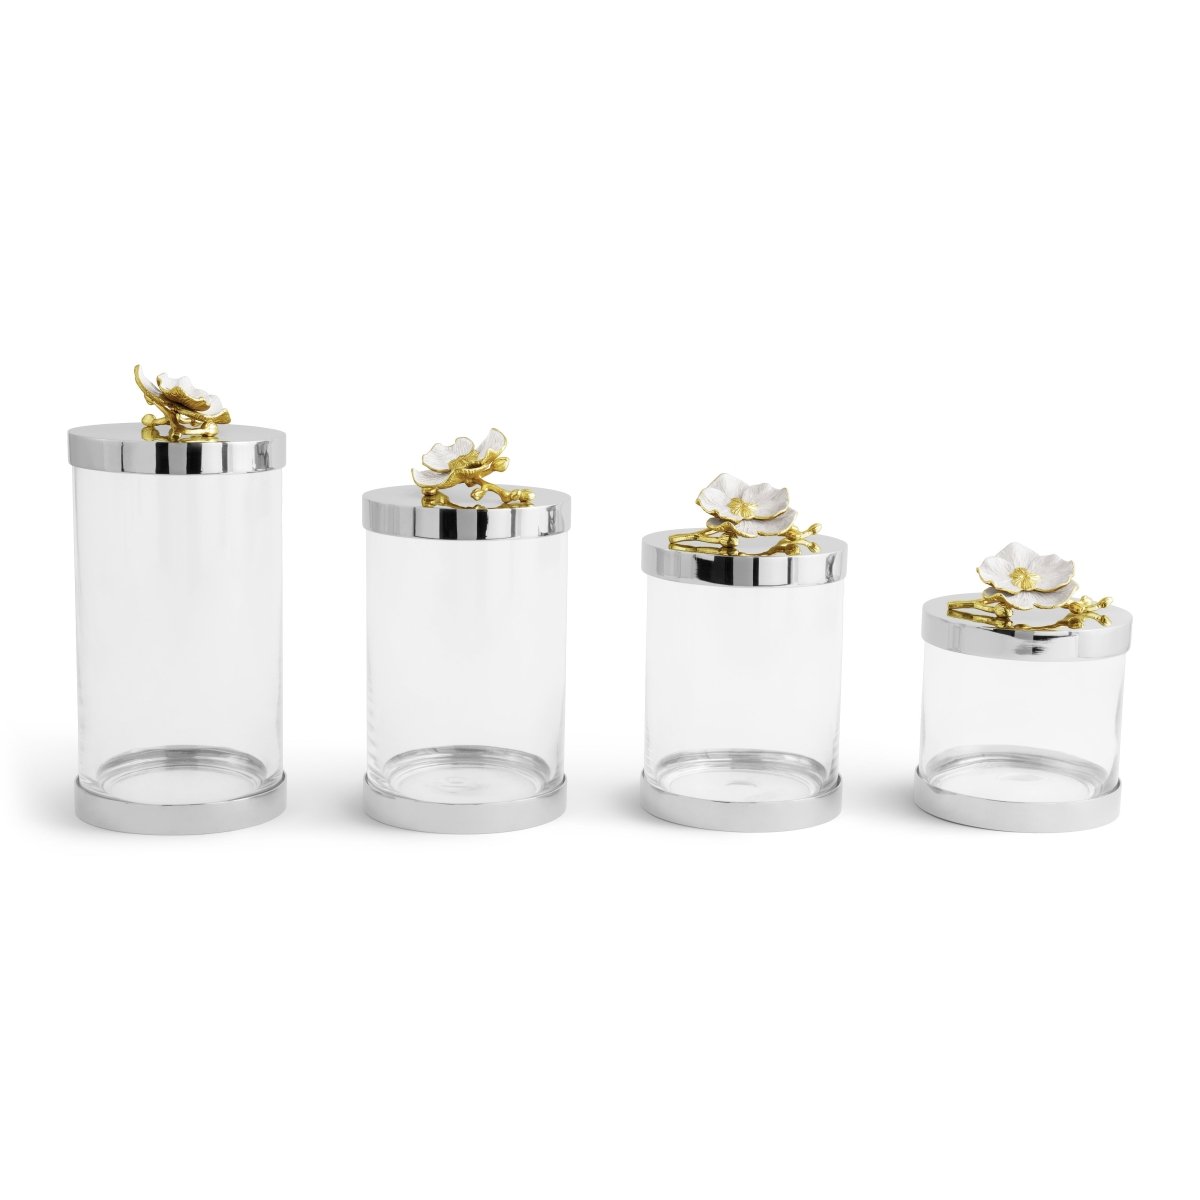 Michael Aram Orchid Canisters